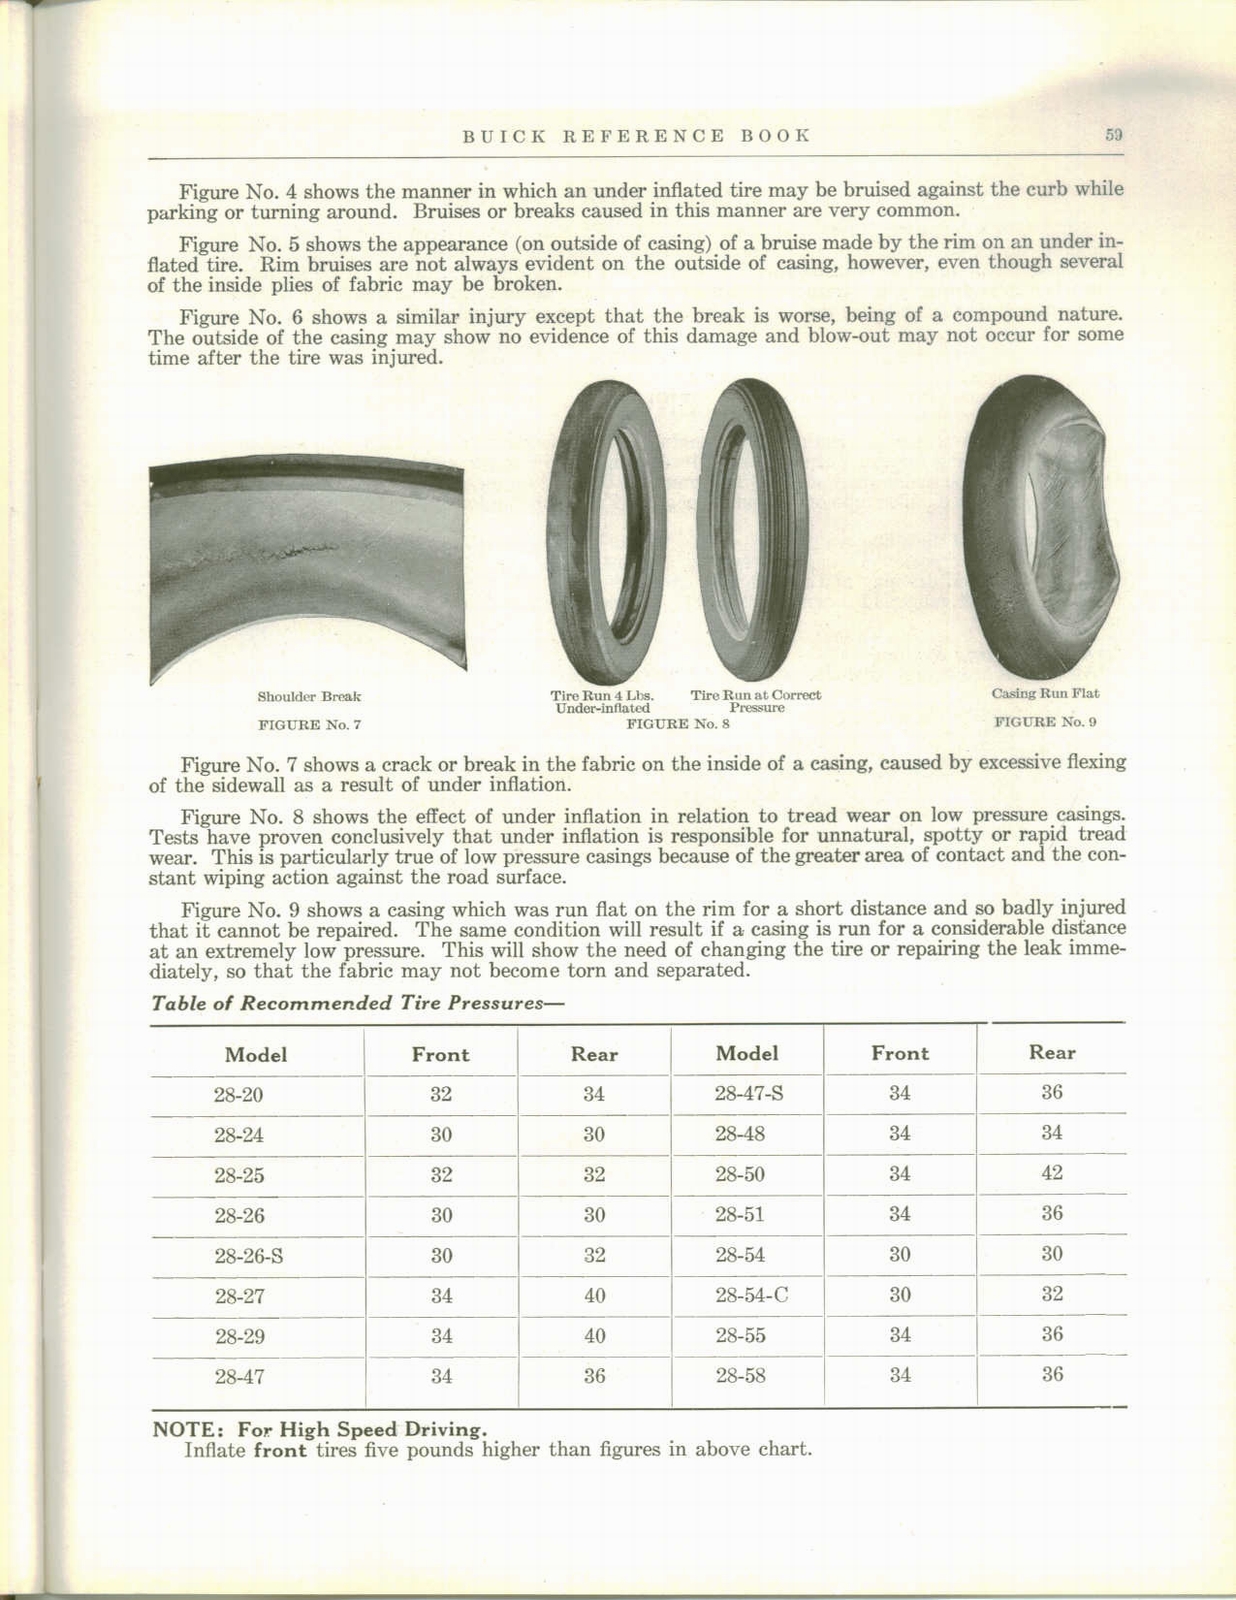 n_1928 Buick Reference Book-59.jpg